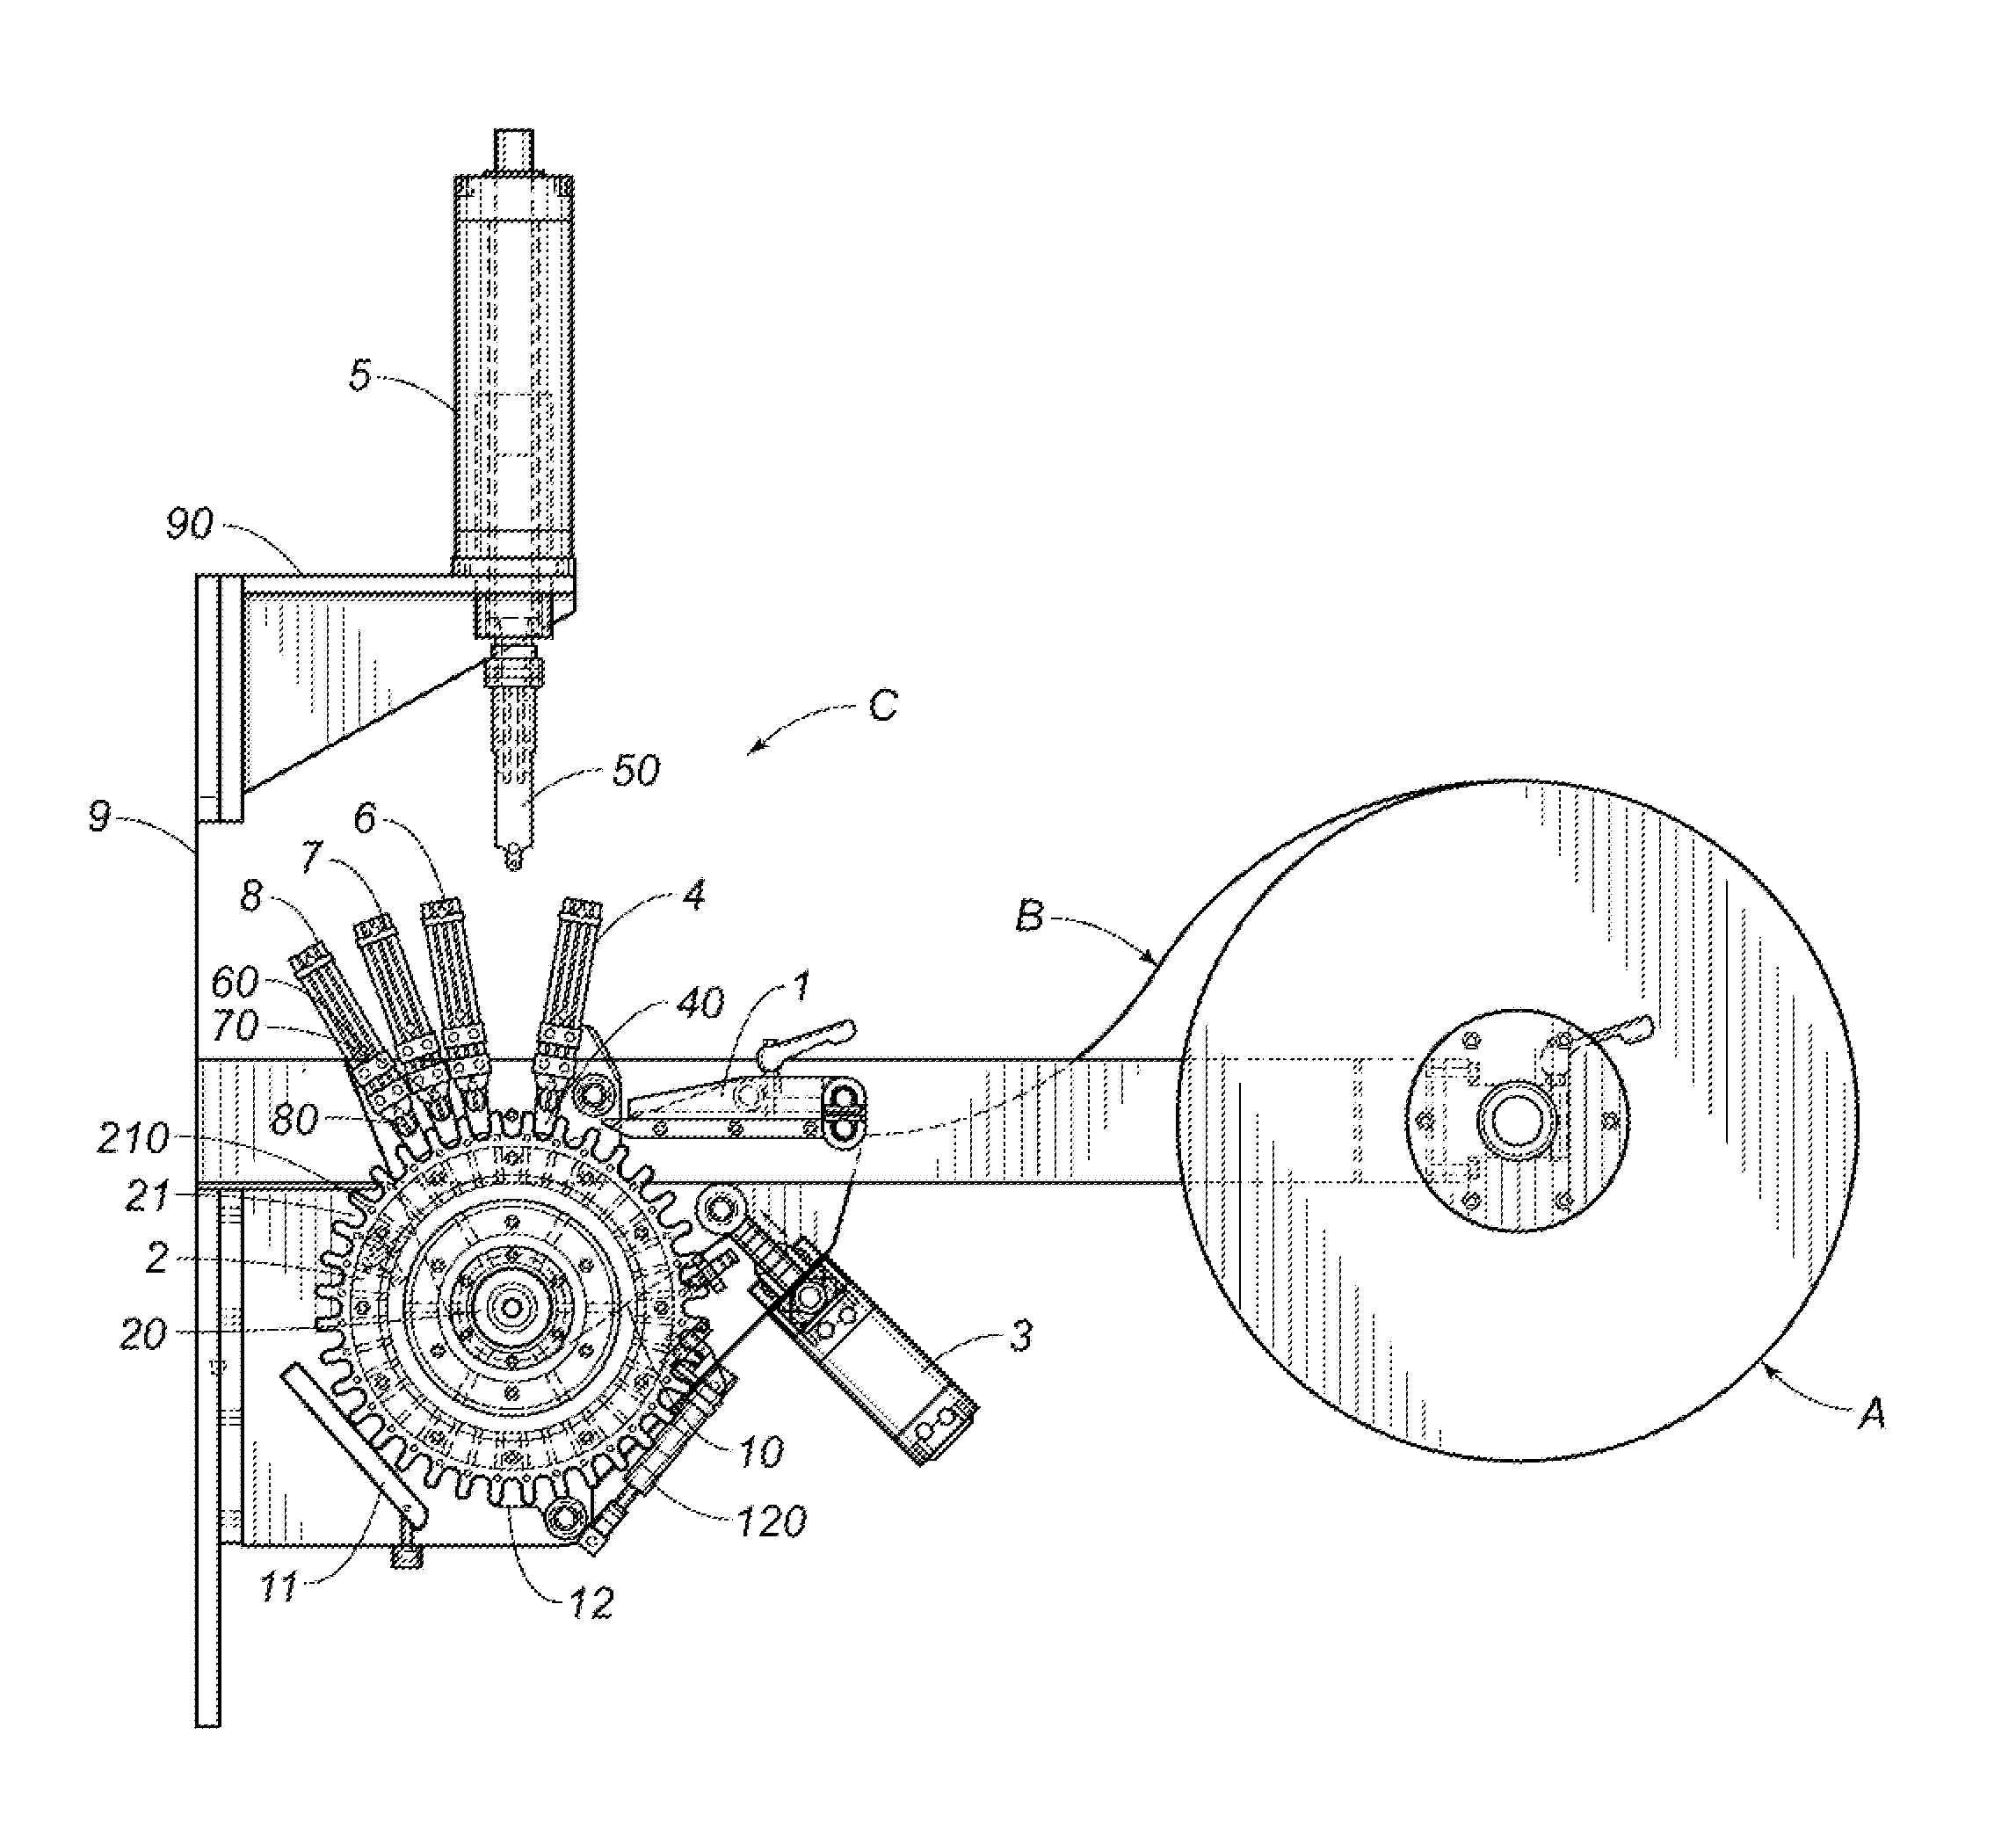 Apparatus for continuously shaping an undulating profile into a plate of polymeric material